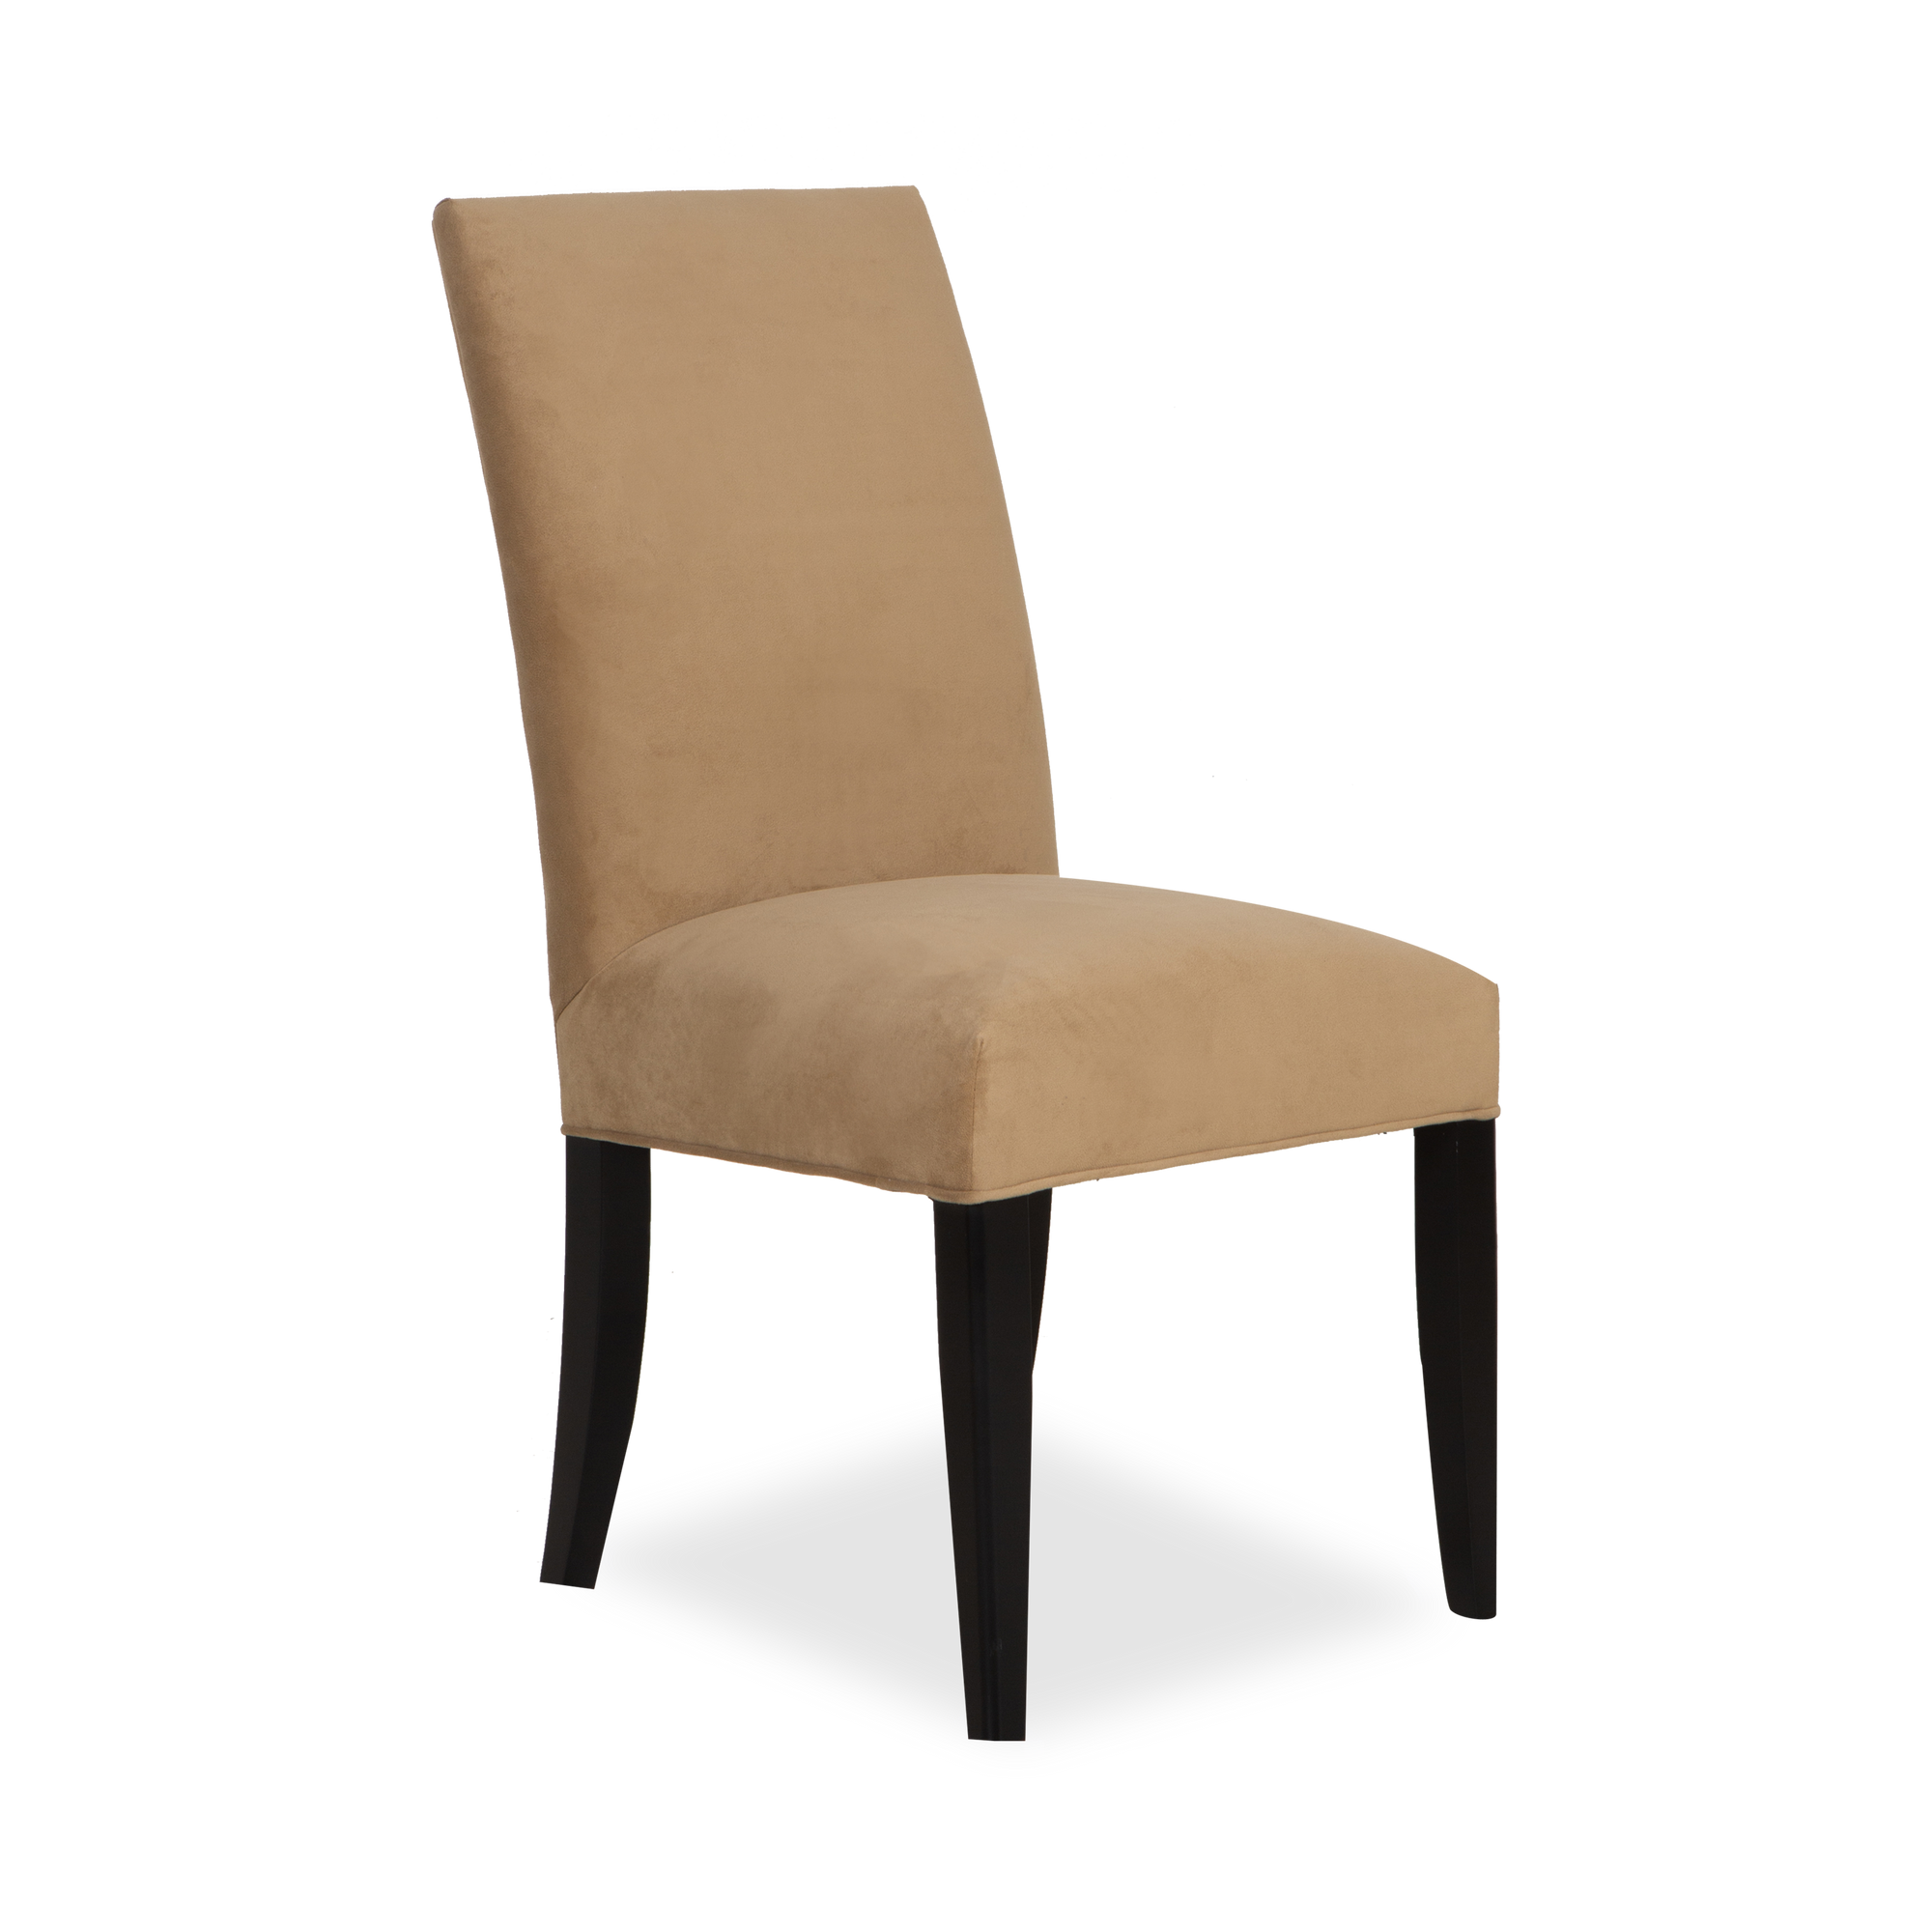 The Shelley Side Chair features beige upholstery atop black legs.